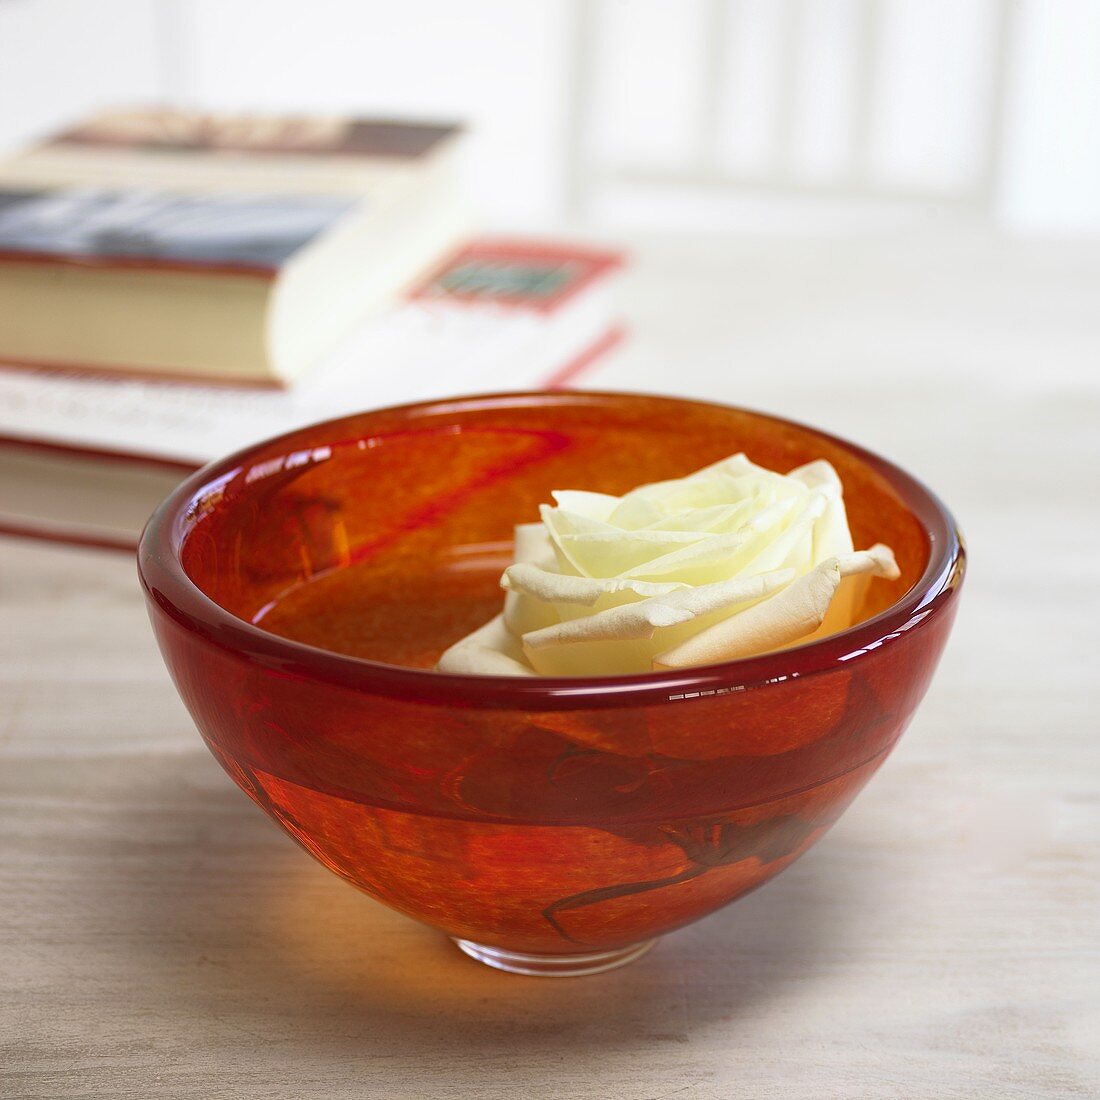 White rose in red glass bowl, books in background